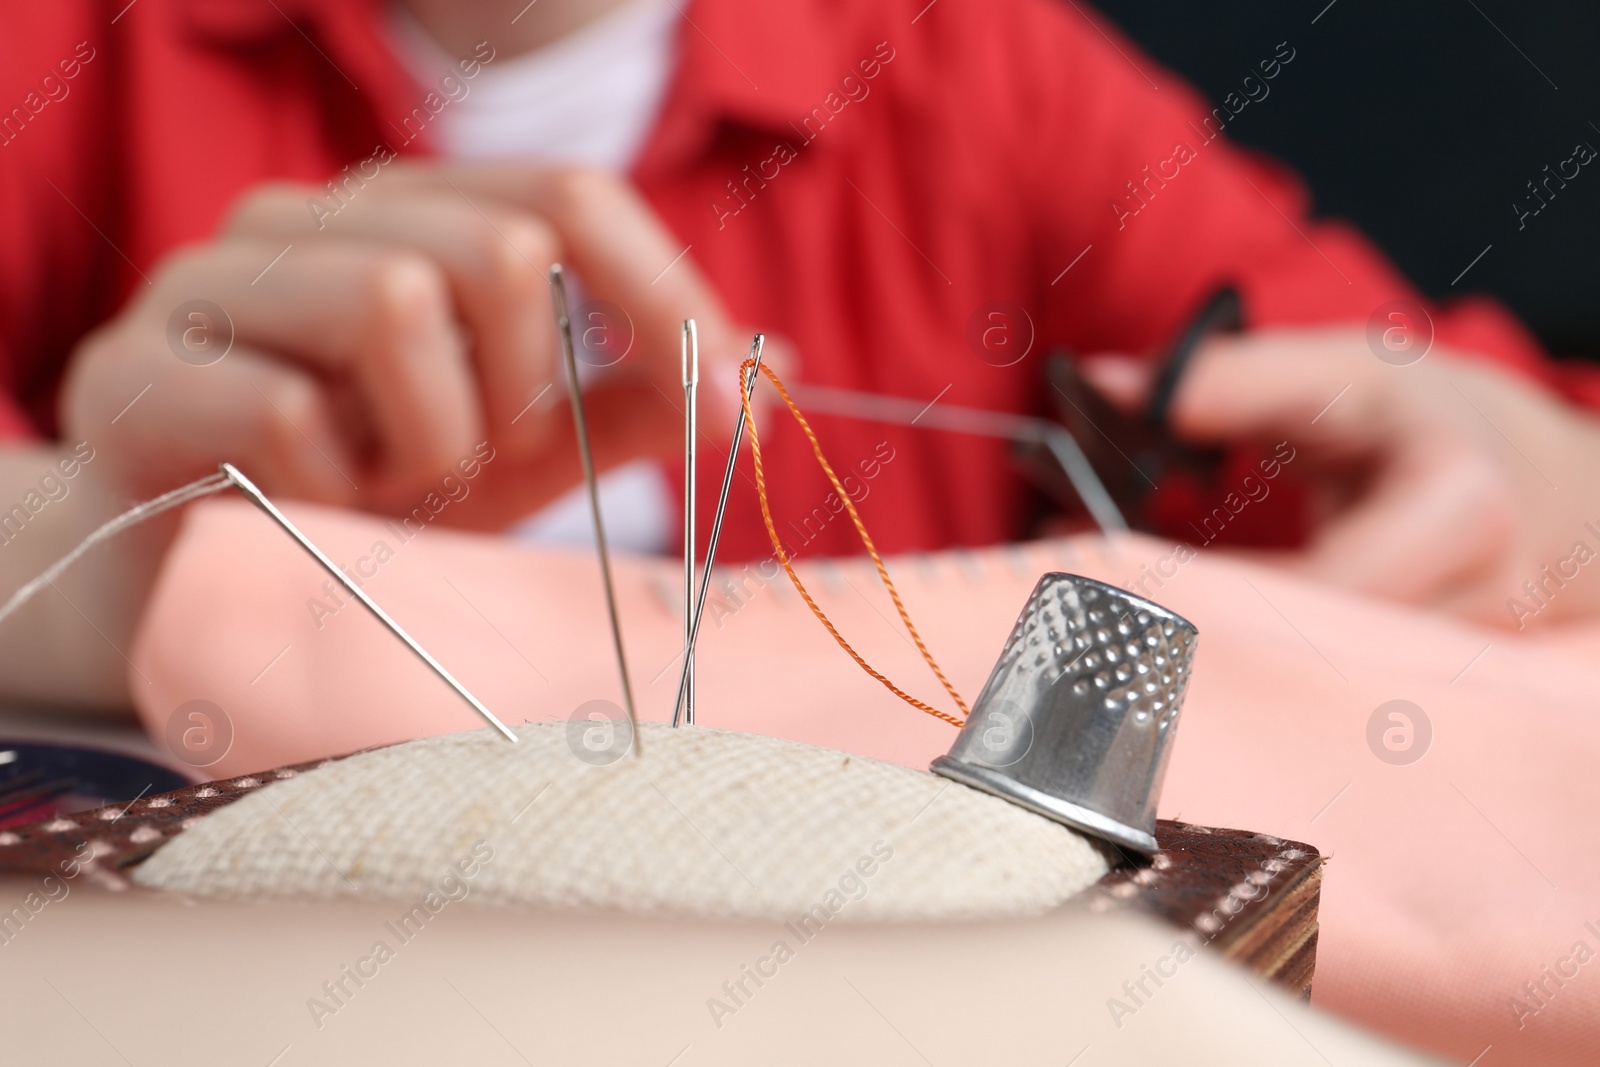 Photo of Woman cutting sewing thread over cloth, focus on pin cushion with needles and thimble